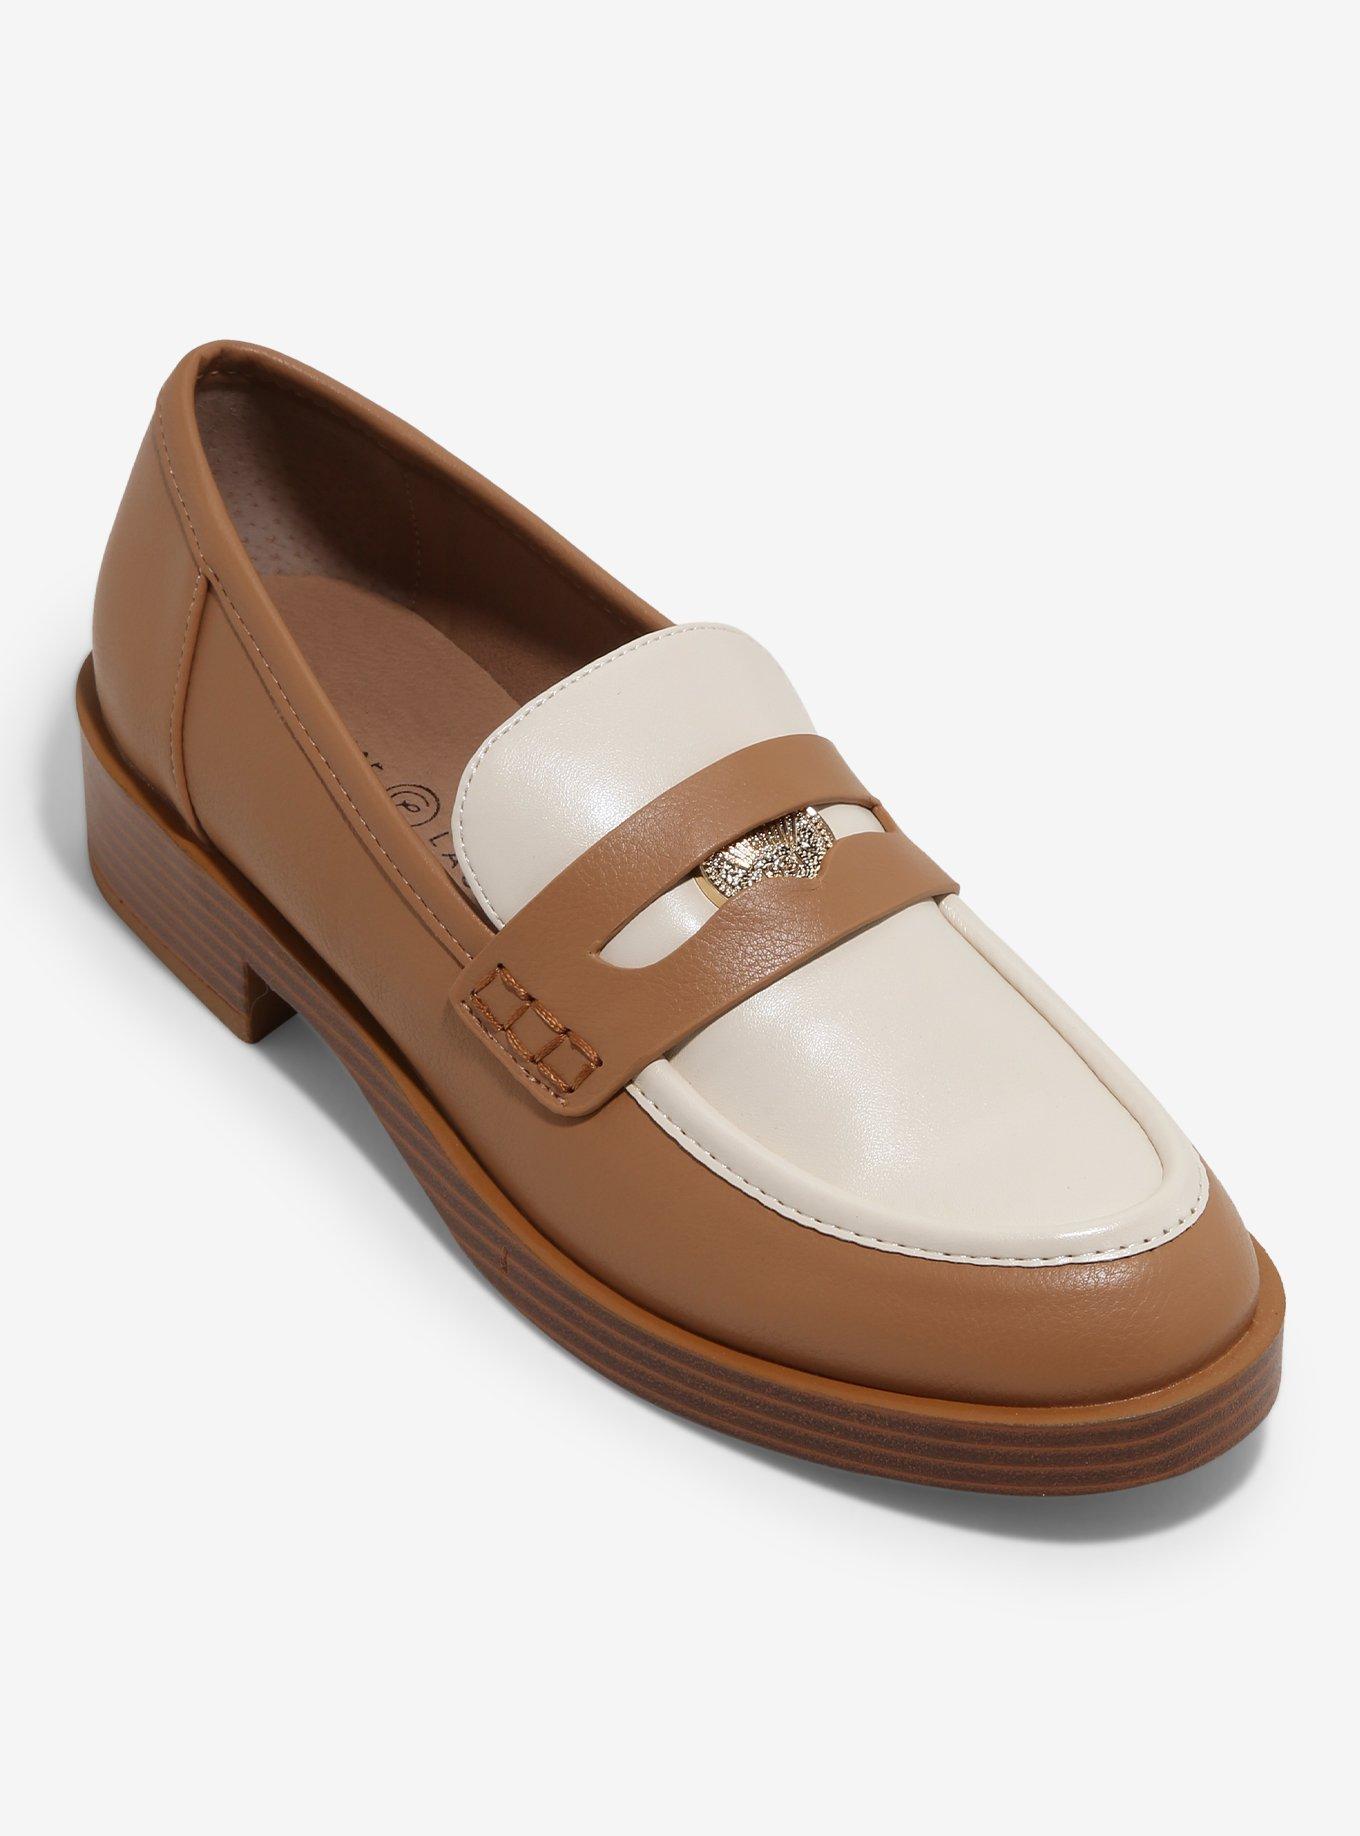 Chinese Laundry Tan & Cream Loafers, MULTI, hi-res